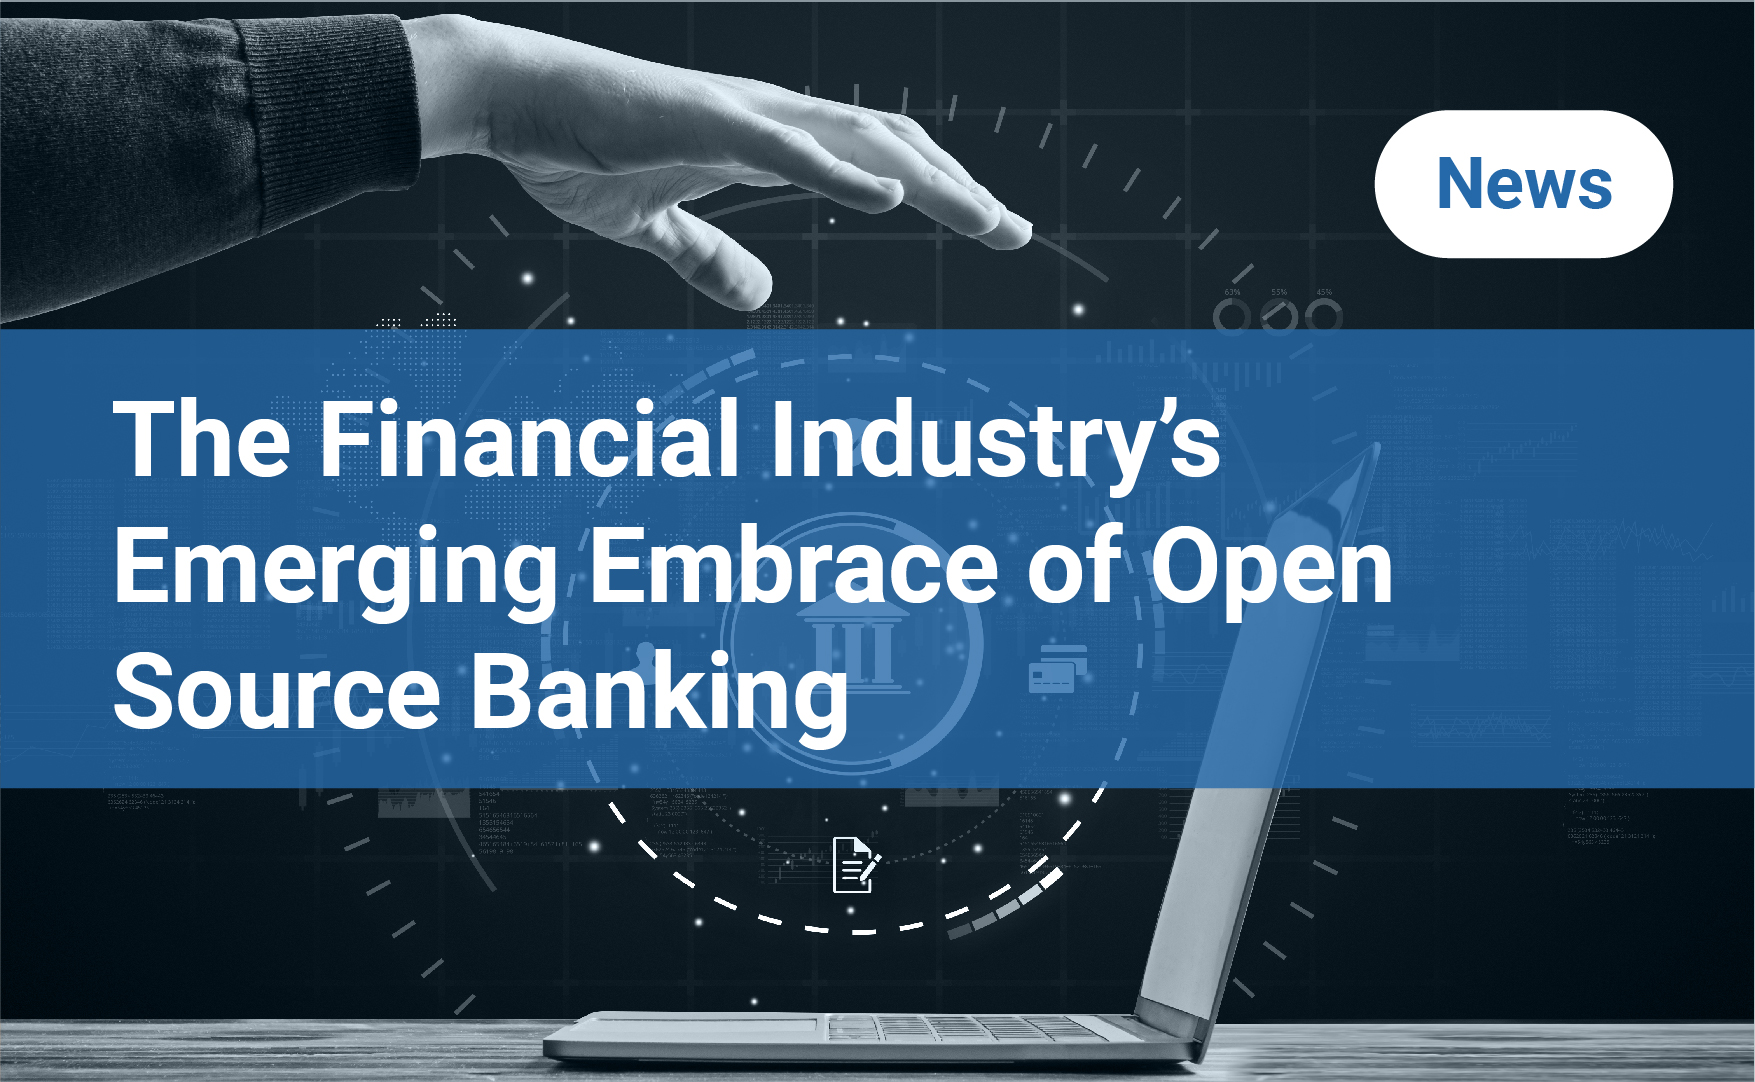 The Financial Industry’s Emerging Embrace of Open Source Banking